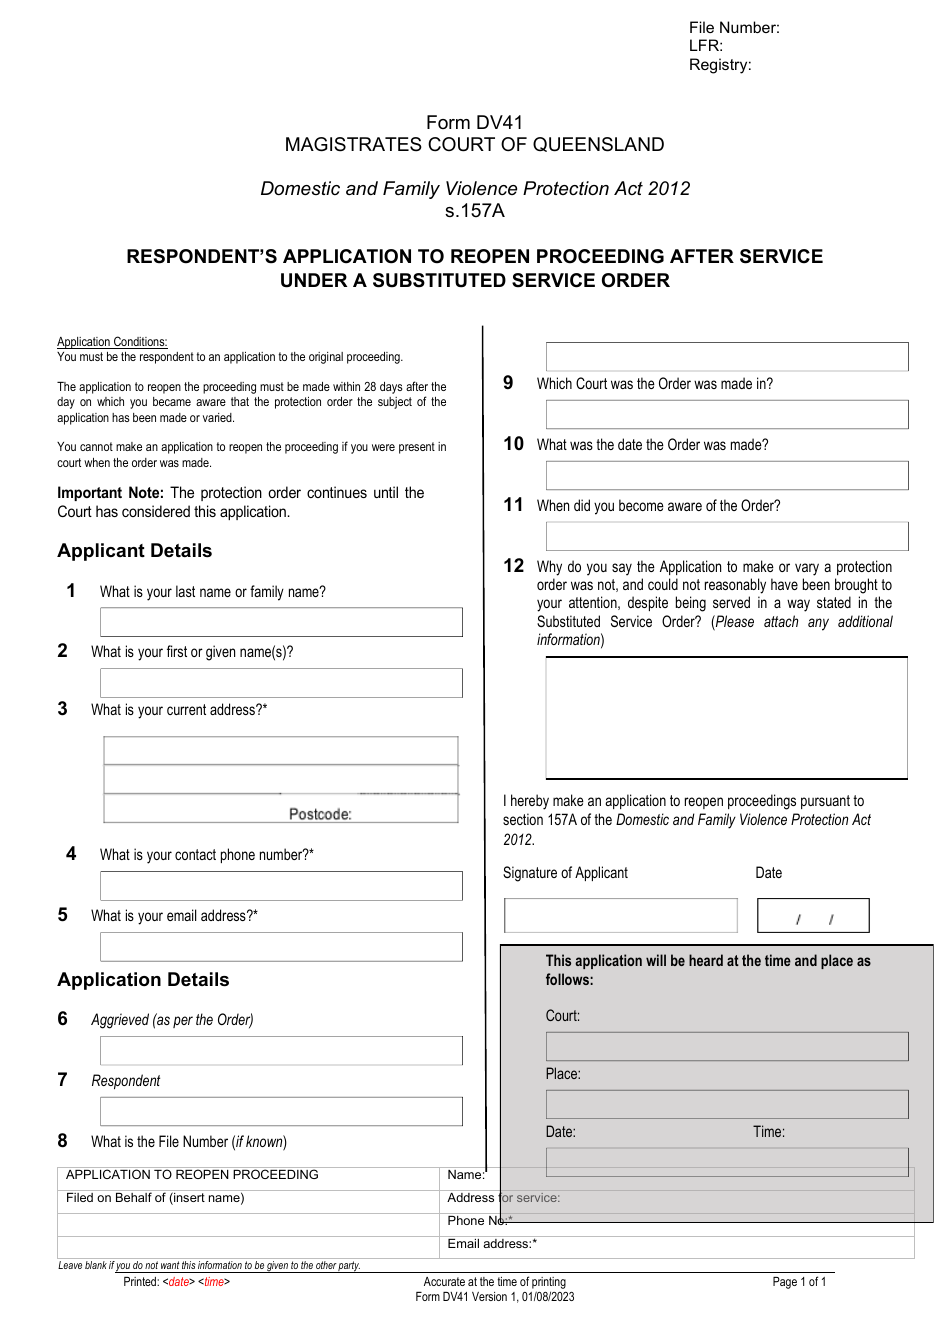 Form DV41 Respondents Application to Reopen Proceeding After Service Under a Substituted Service Order - Queensland, Australia, Page 1